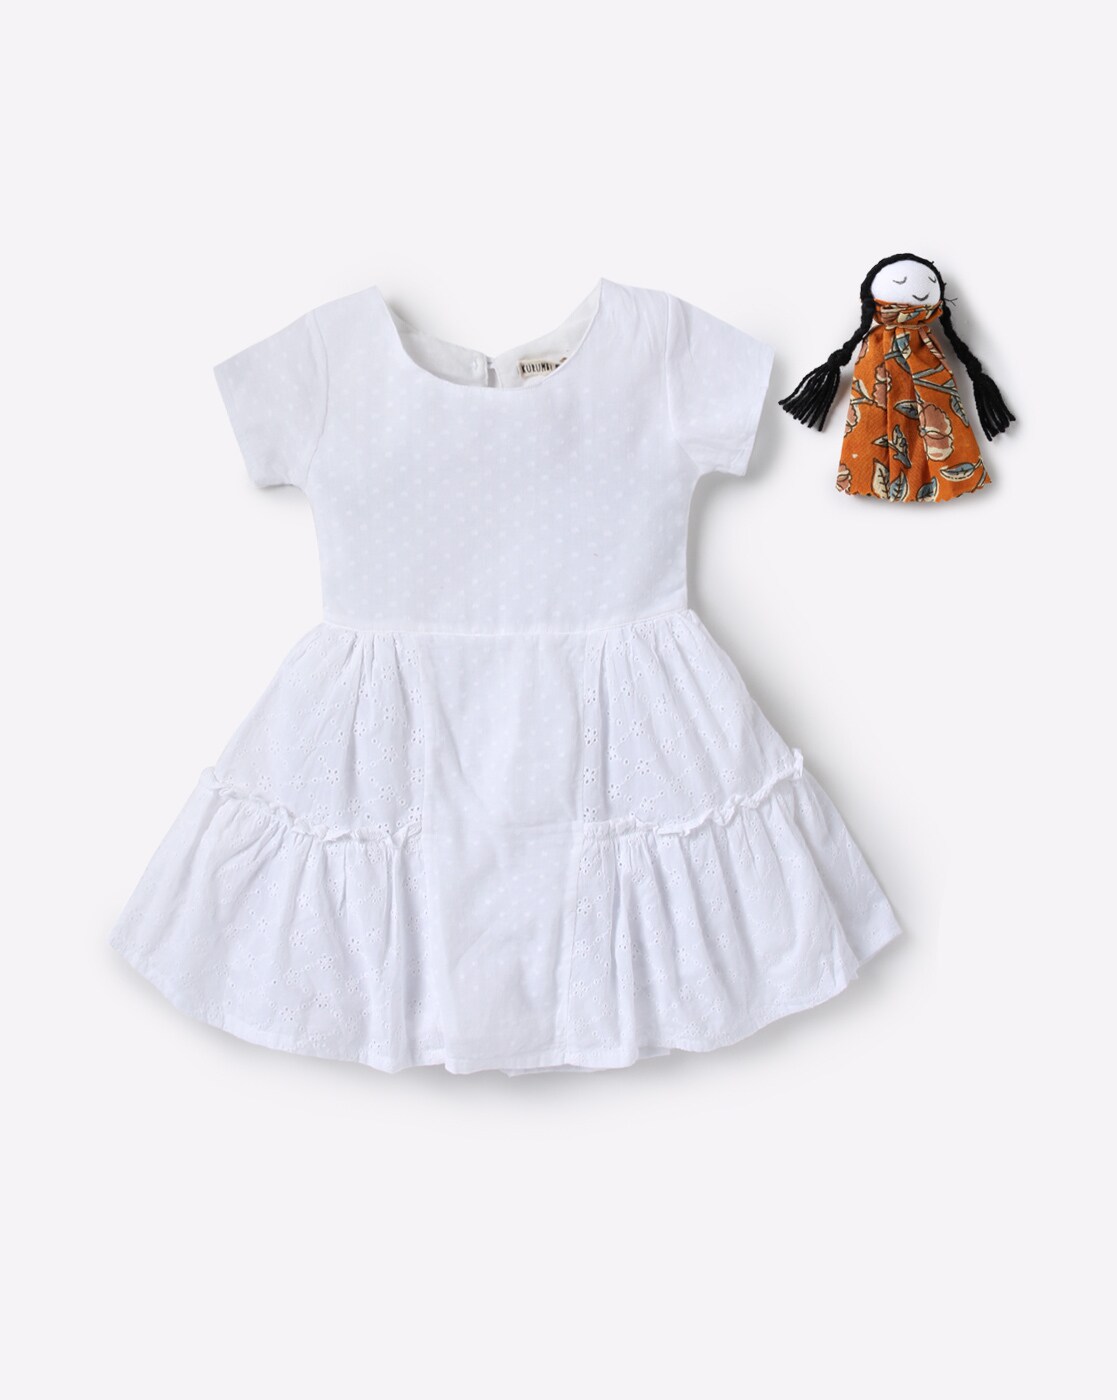 rag and doll clothing